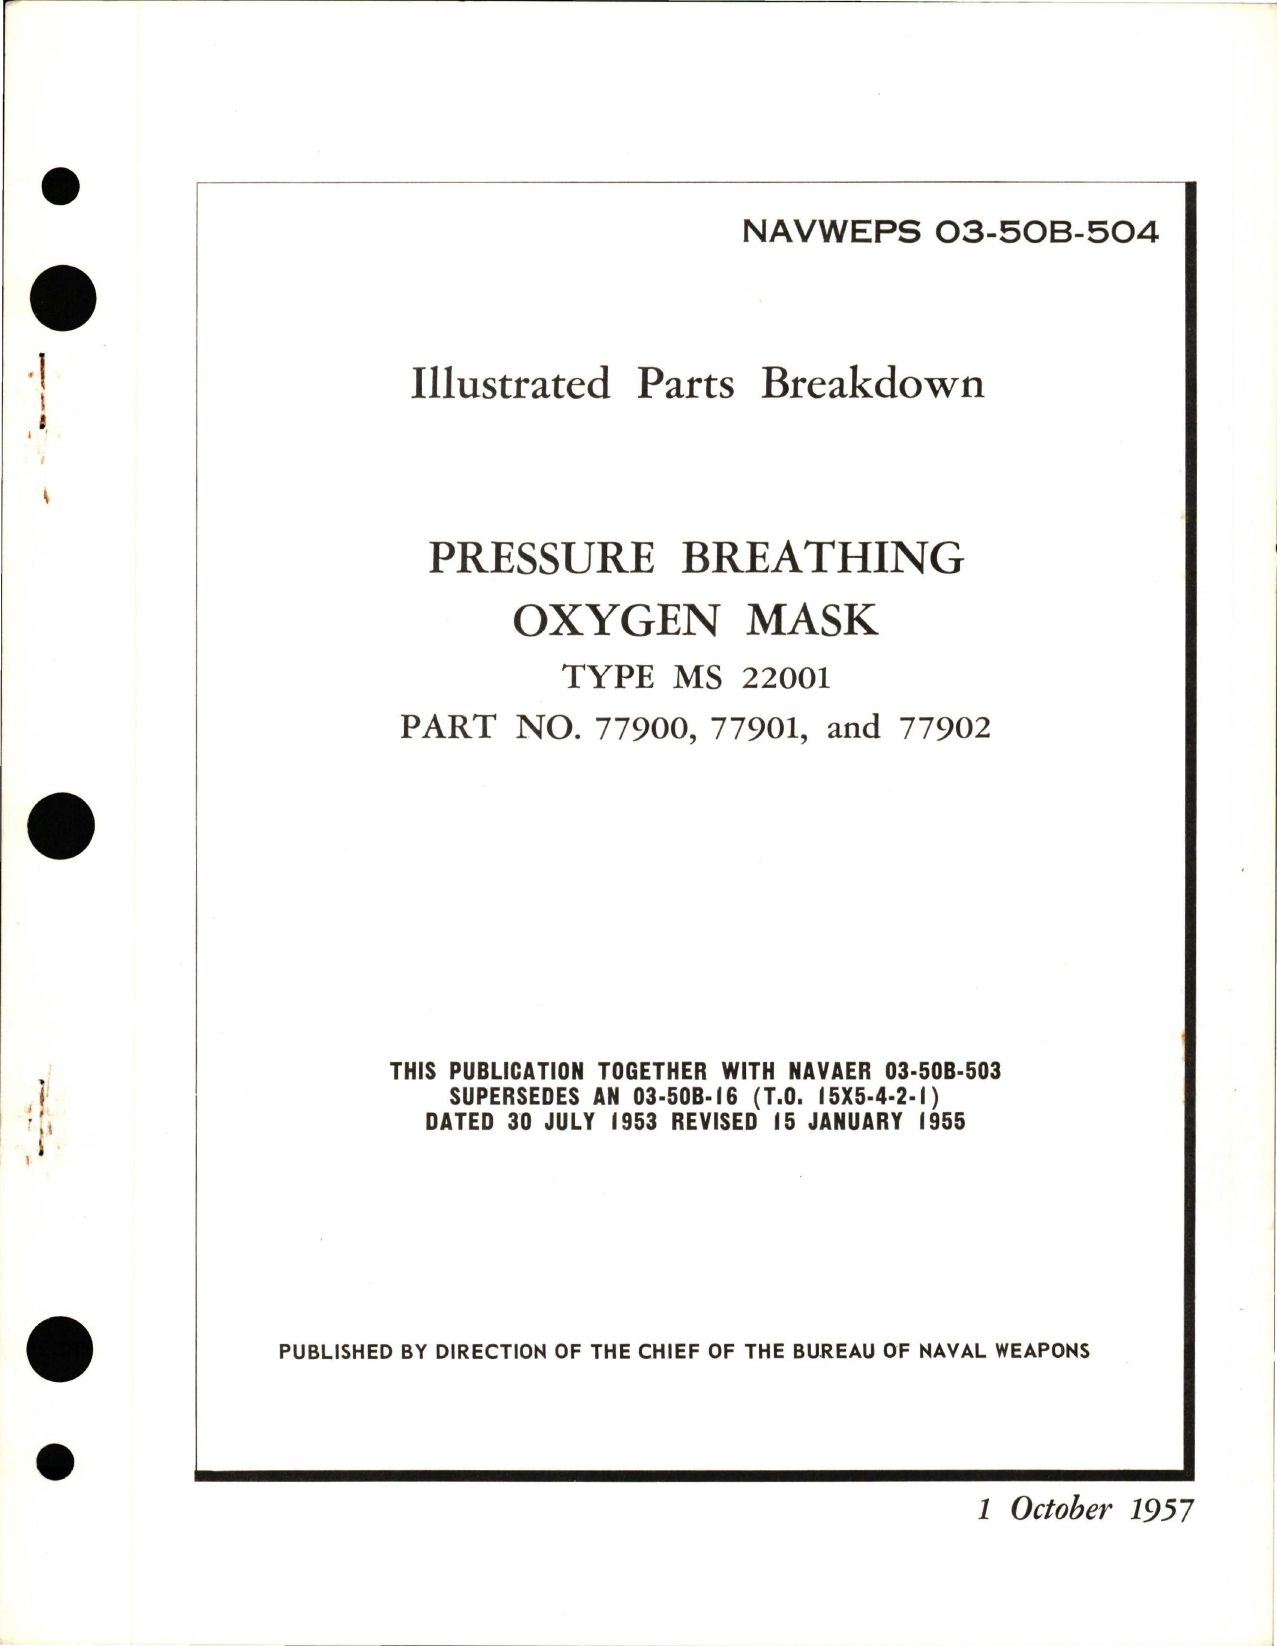 Sample page 1 from AirCorps Library document: Illustrated Parts Breakdown for Pressure Breathing Oxygen Mask - Type MS 22001 - Parts 77900, 77901, and 77902 